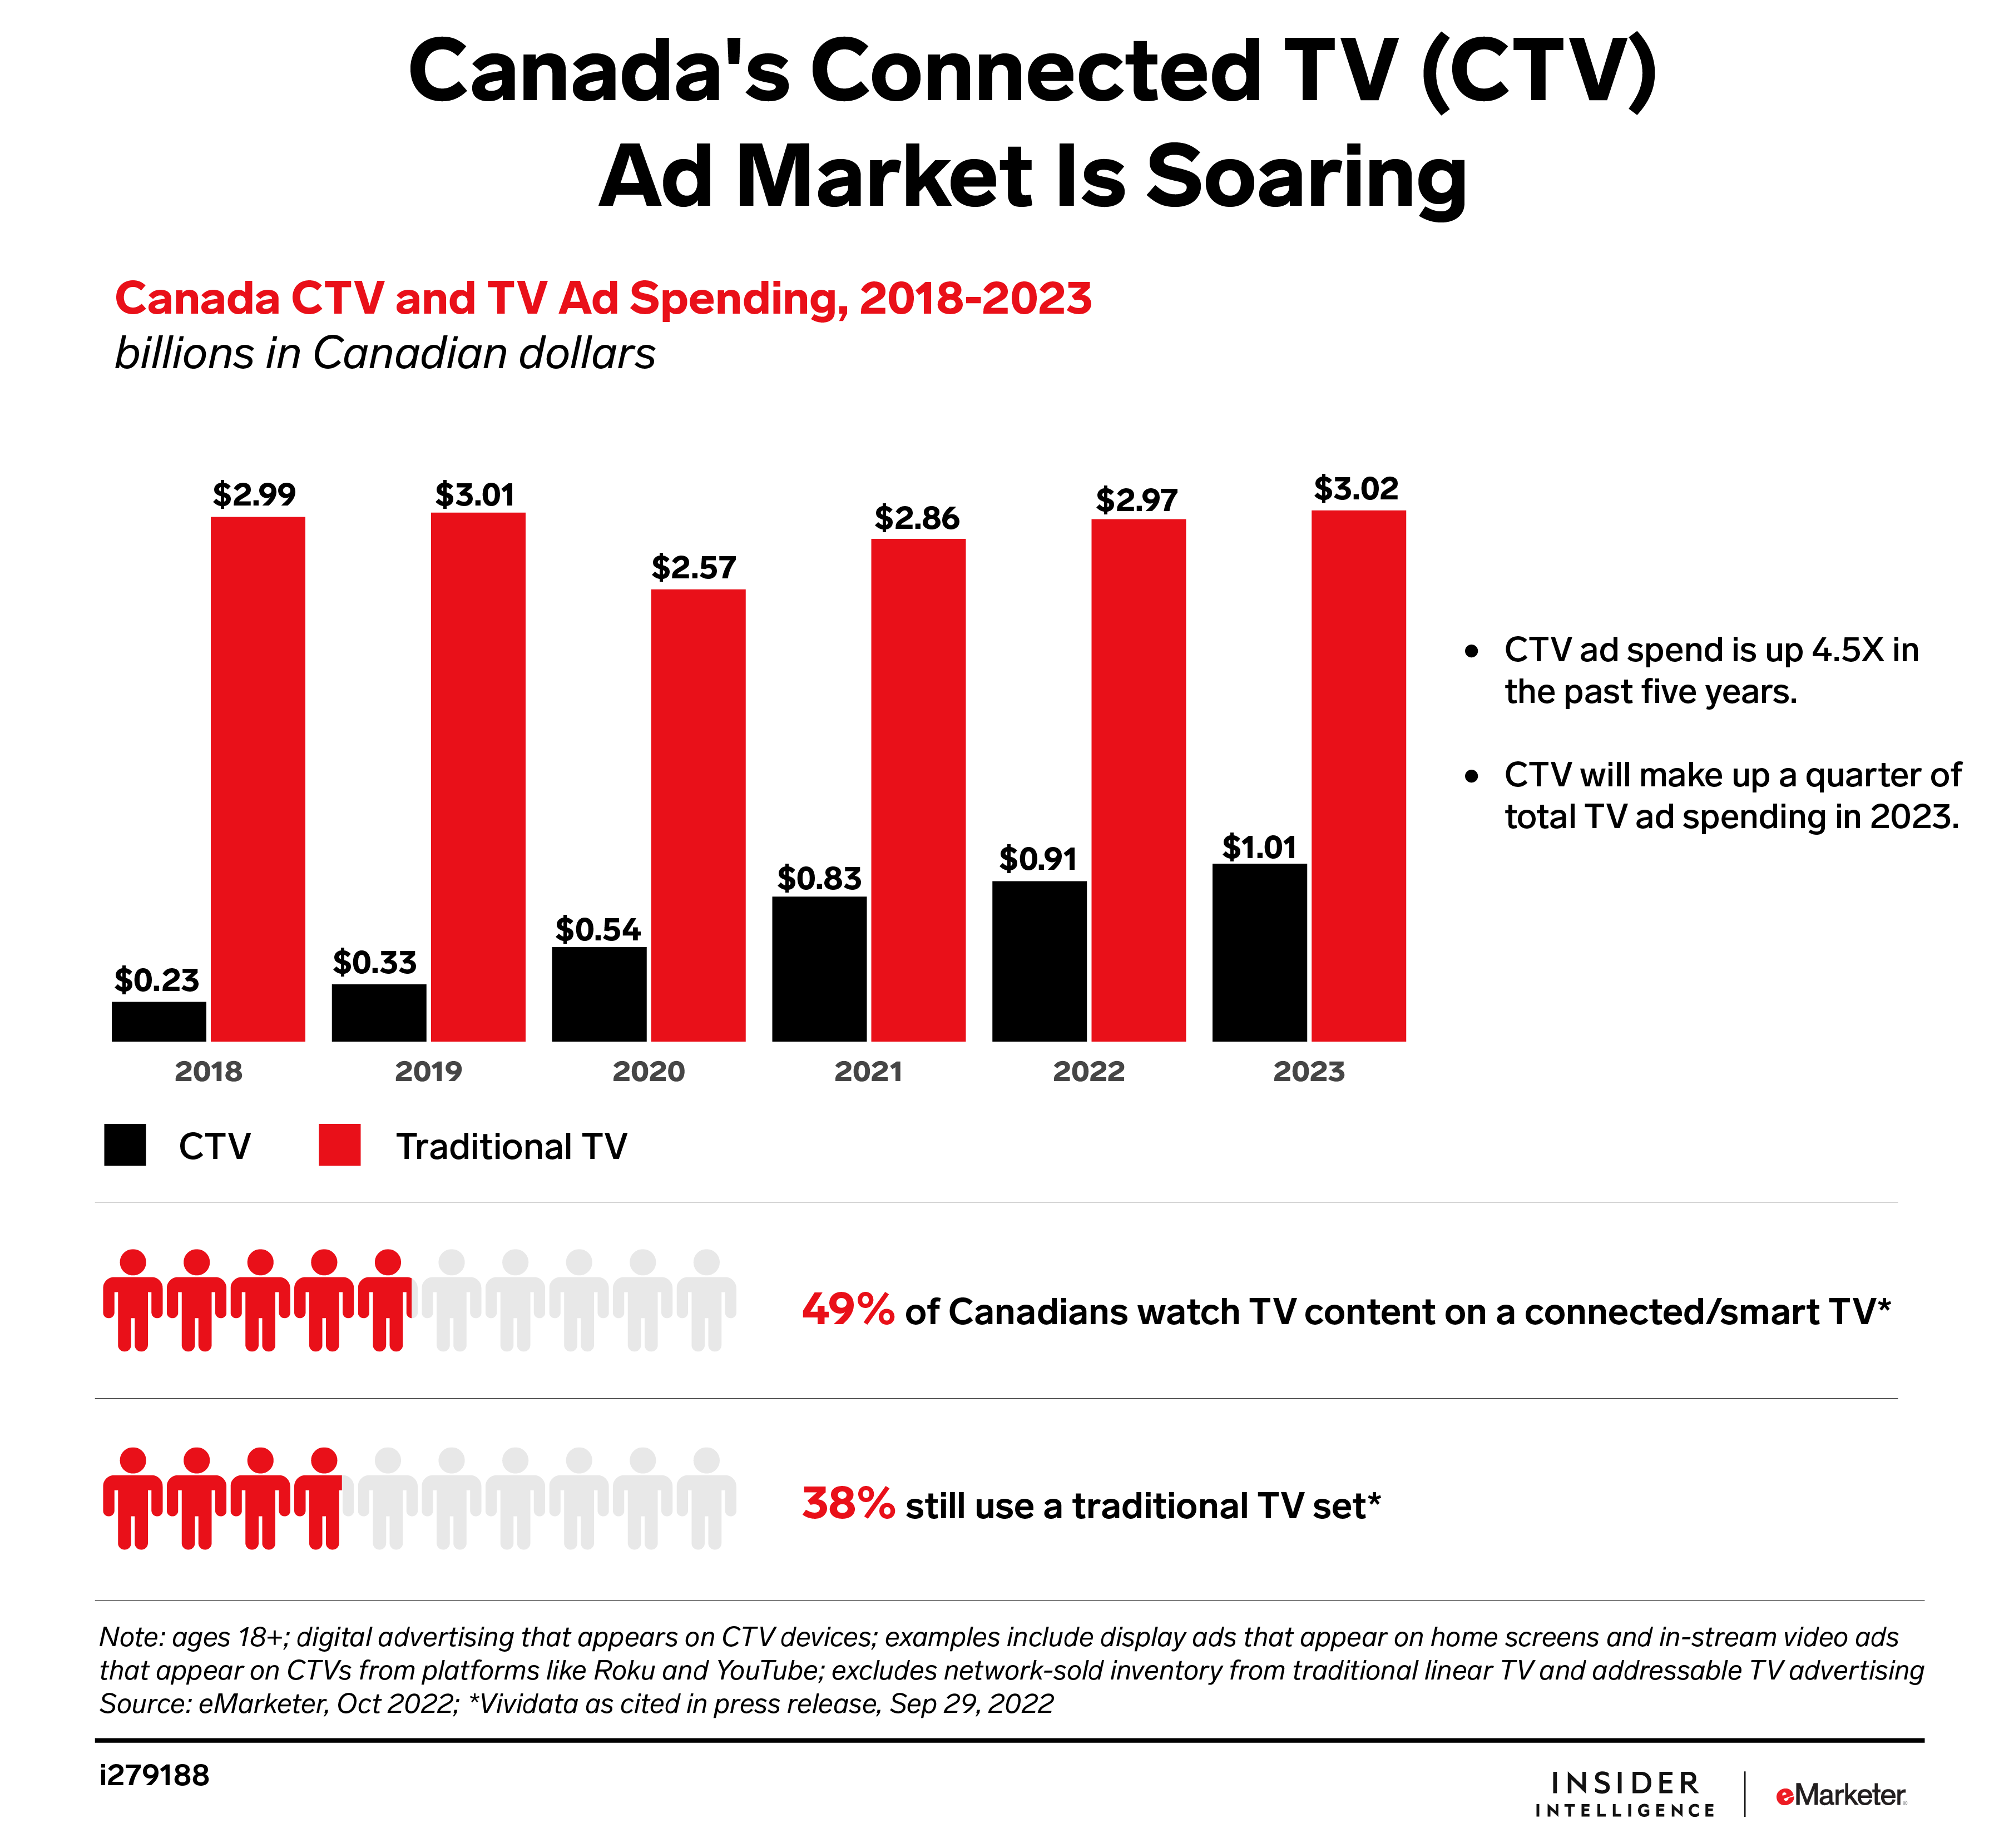 Canada's Connected TV (CTV) Ad Market Is Soaring